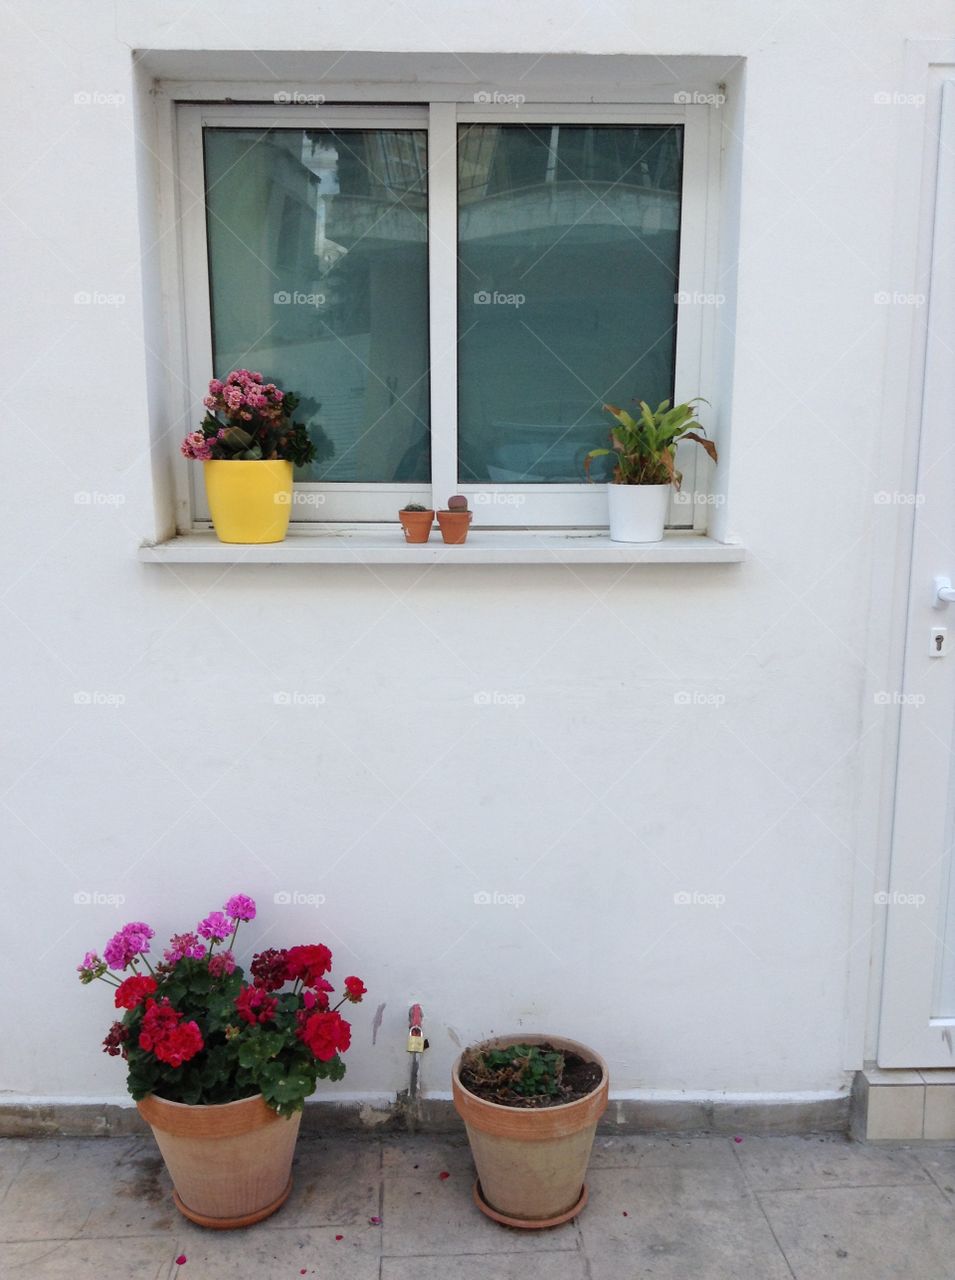 Pot plants on and under window sill.